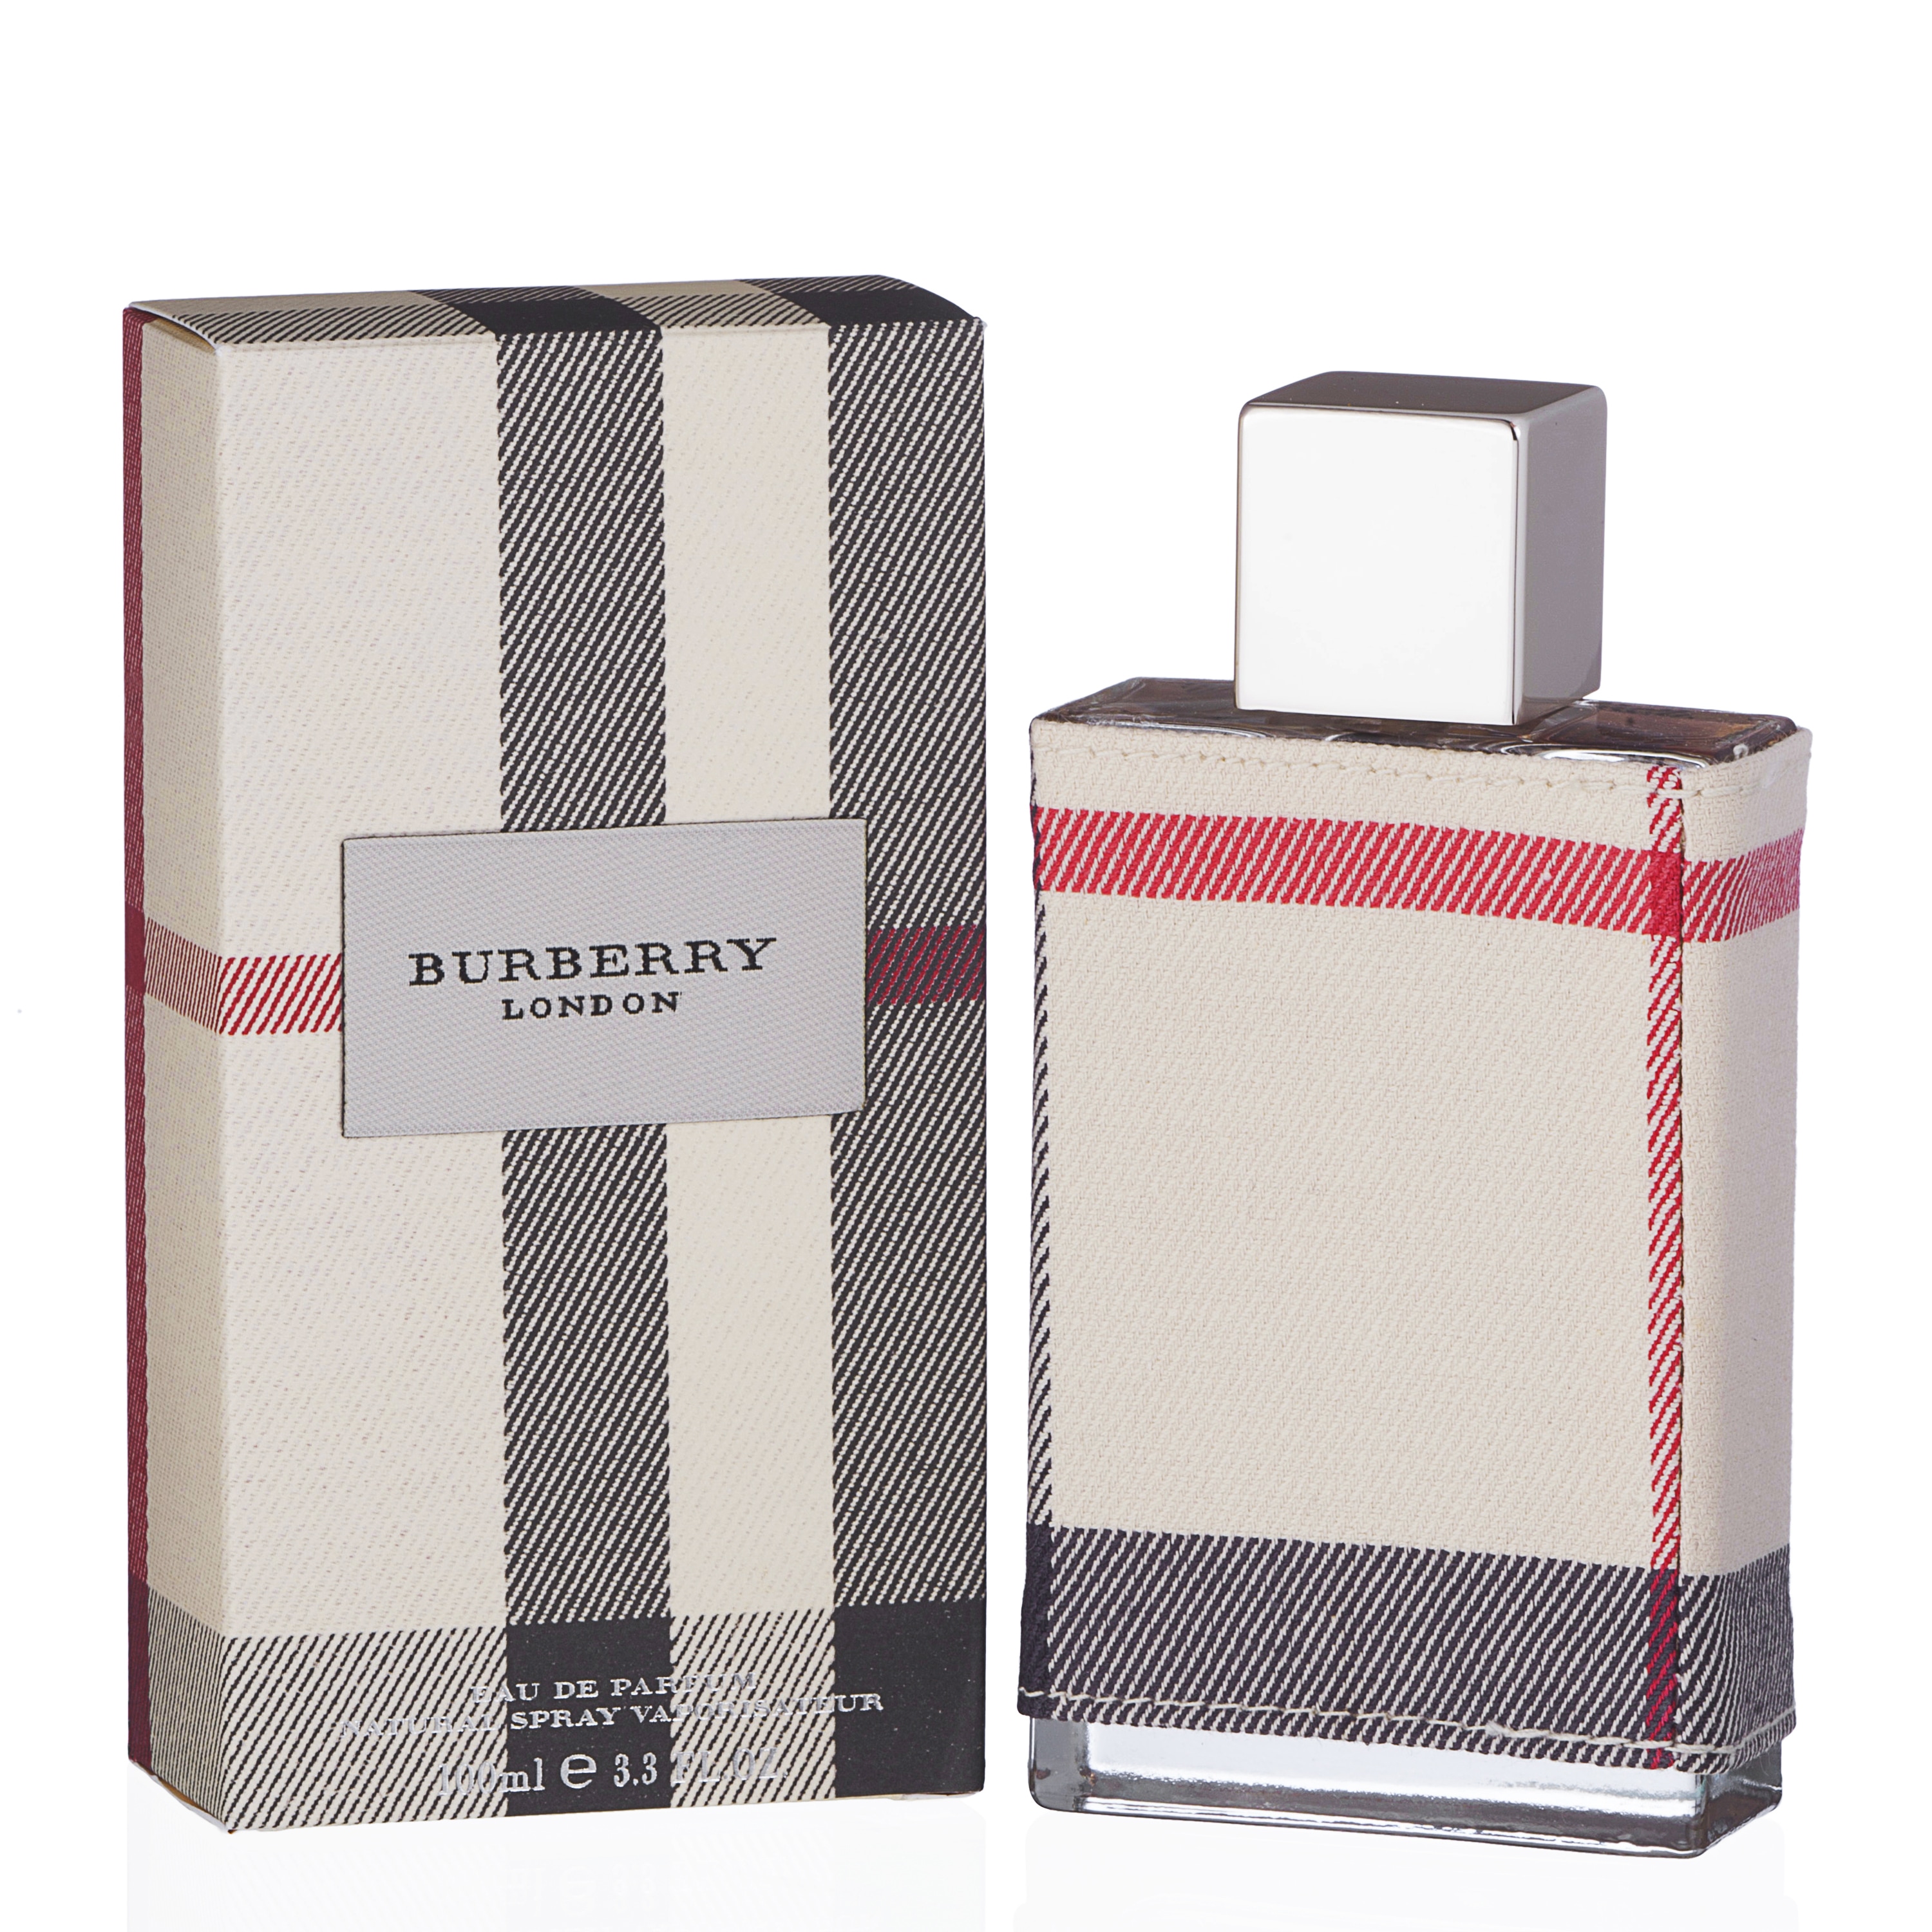 Burberry London Fabric by Burberry 3.3 3.4 oz EDP Perfume for Women New In Box